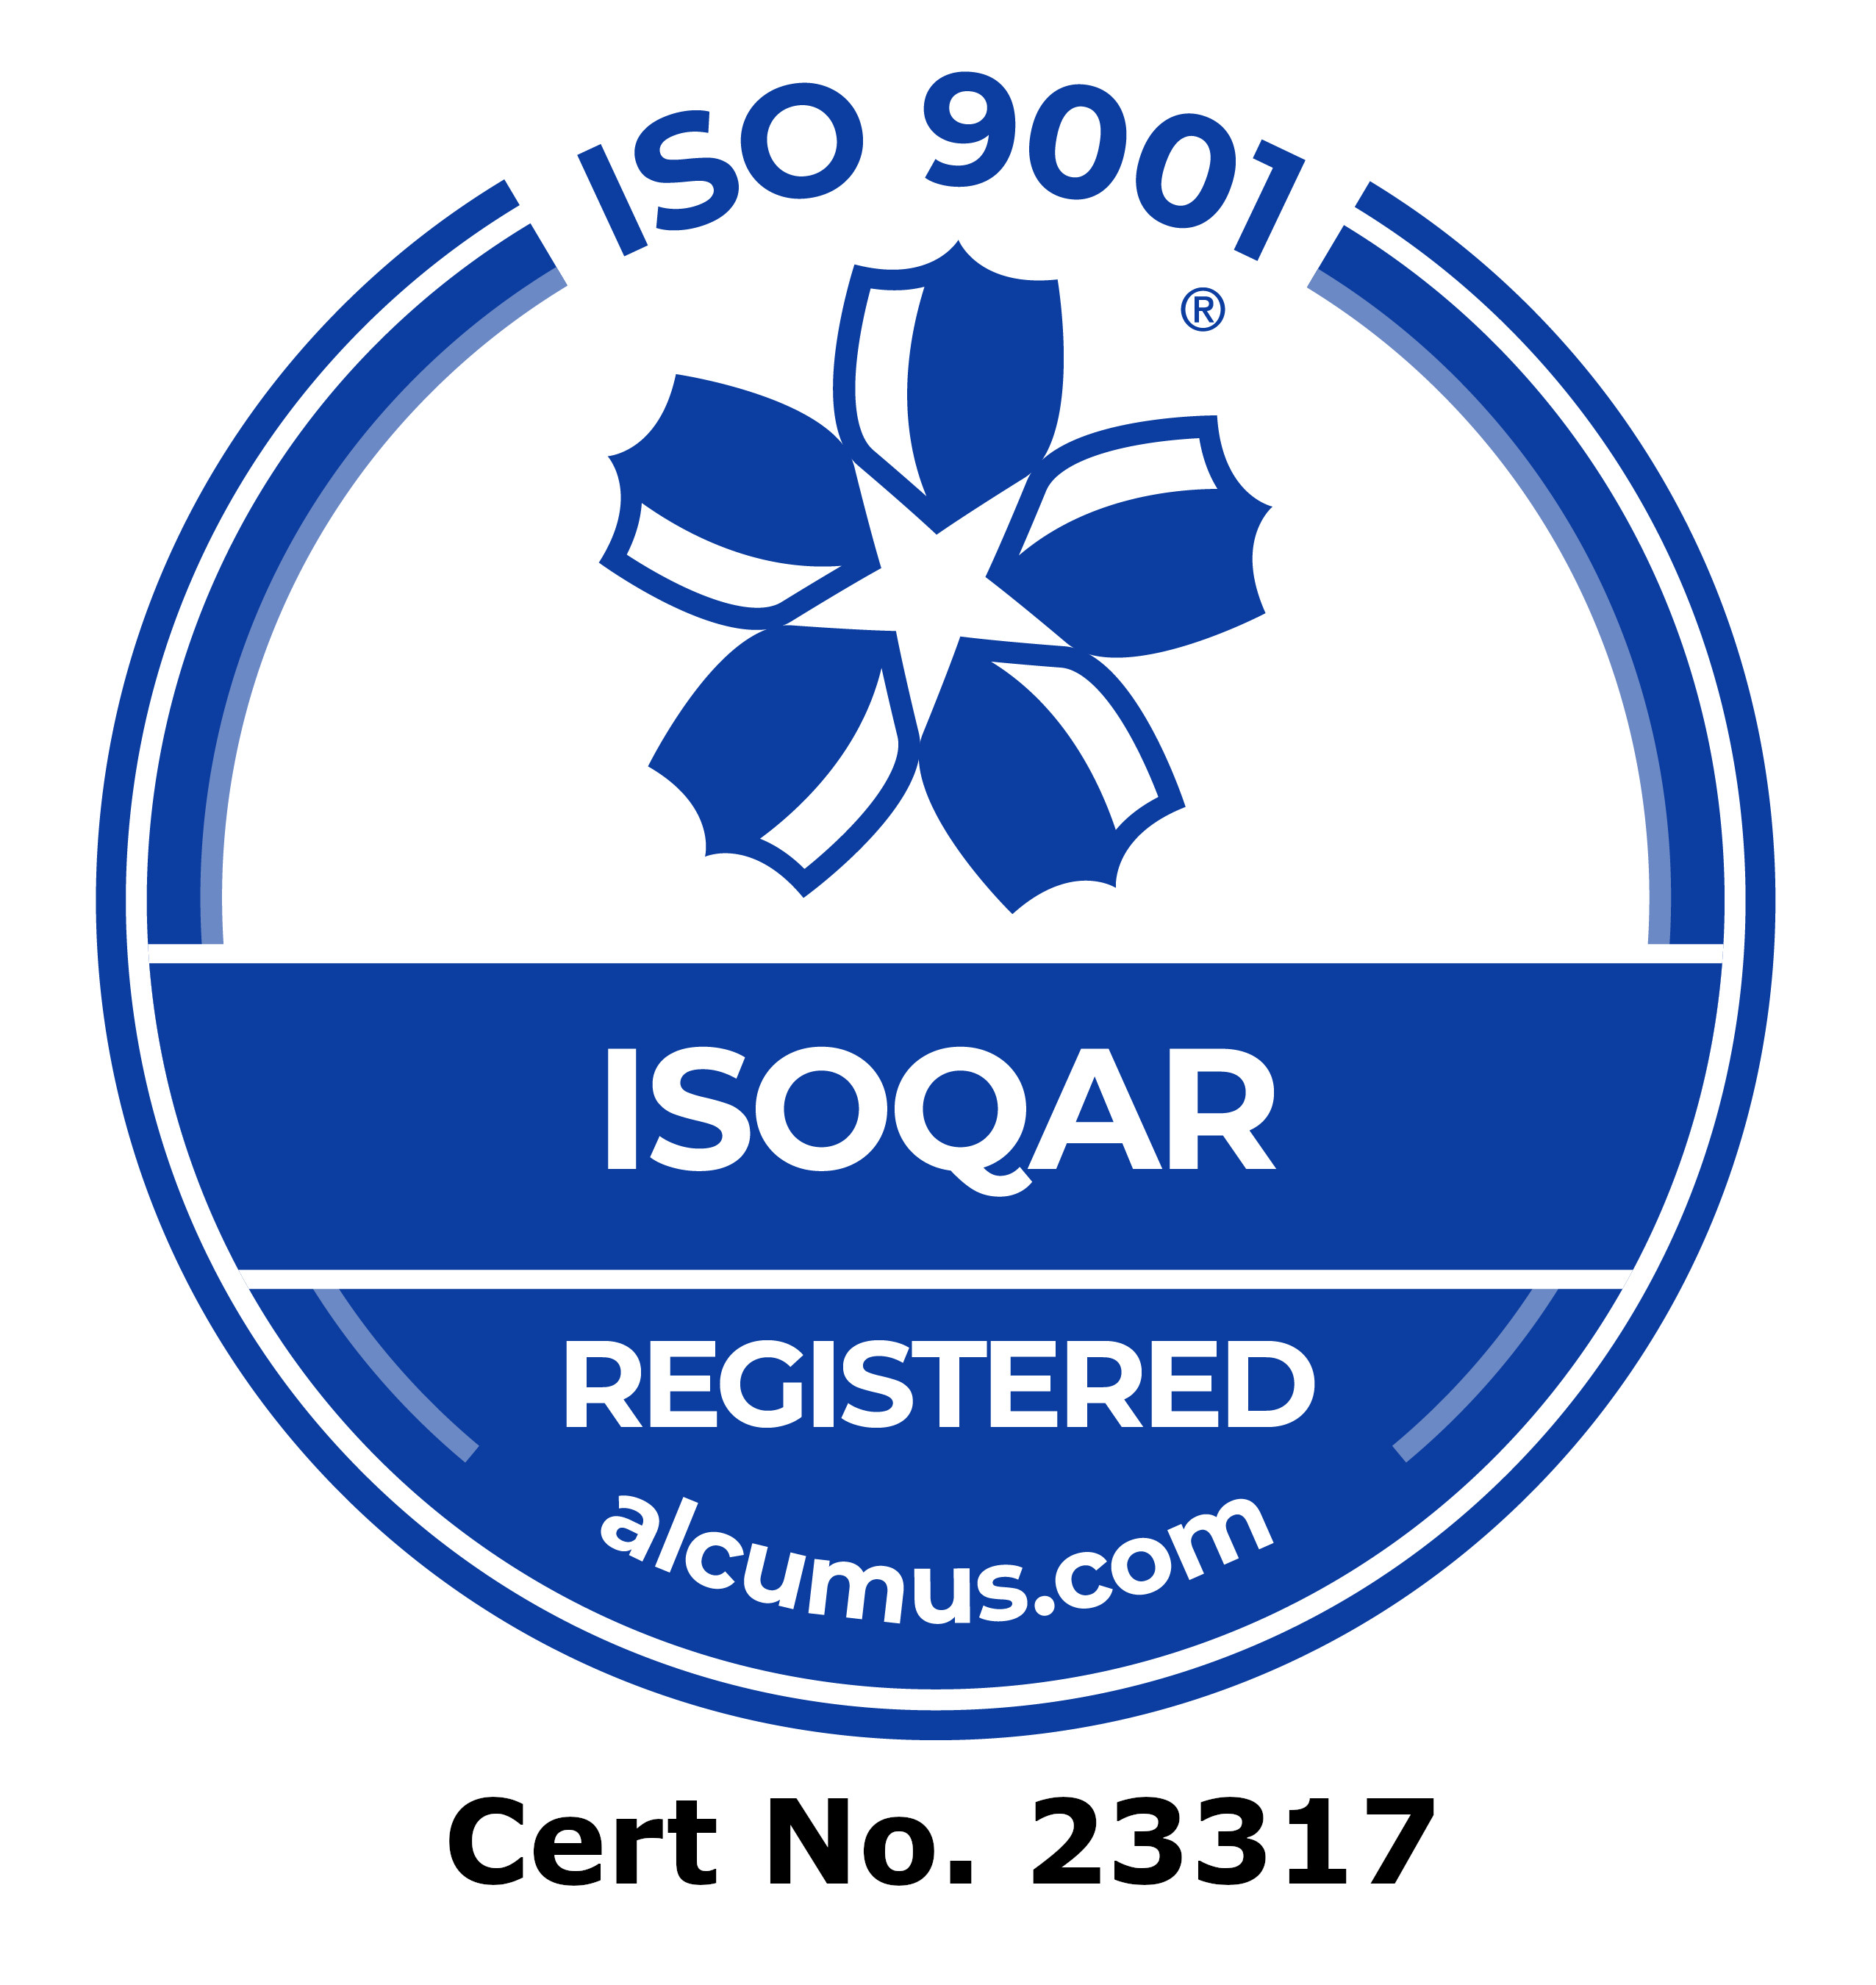 ISO9001ロゴ